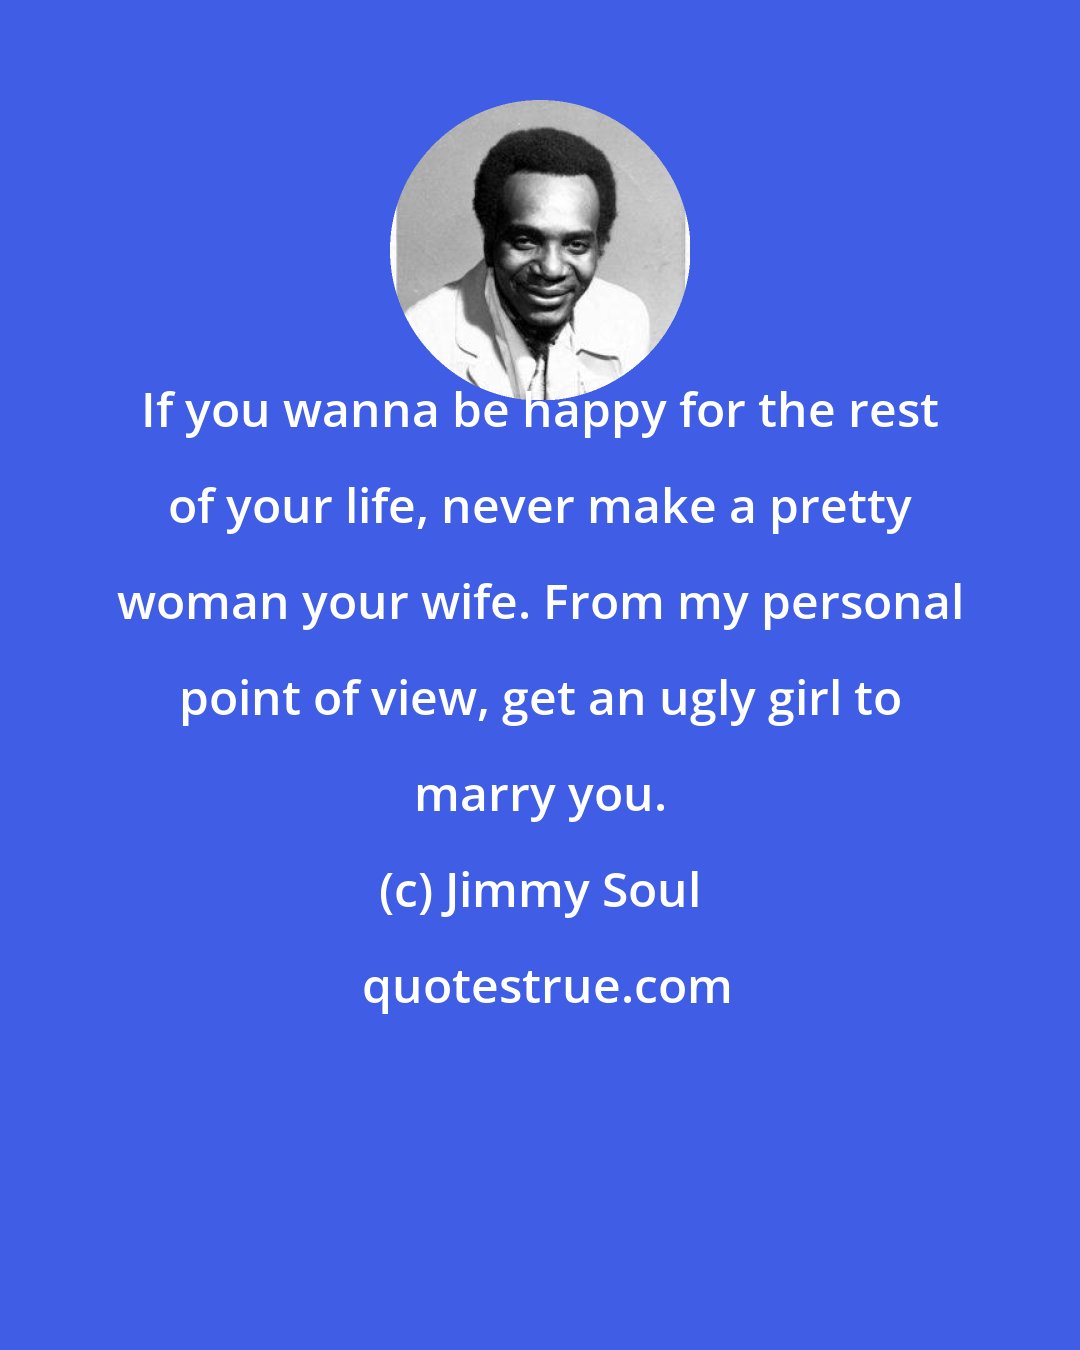 Jimmy Soul: If you wanna be happy for the rest of your life, never make a pretty woman your wife. From my personal point of view, get an ugly girl to marry you.